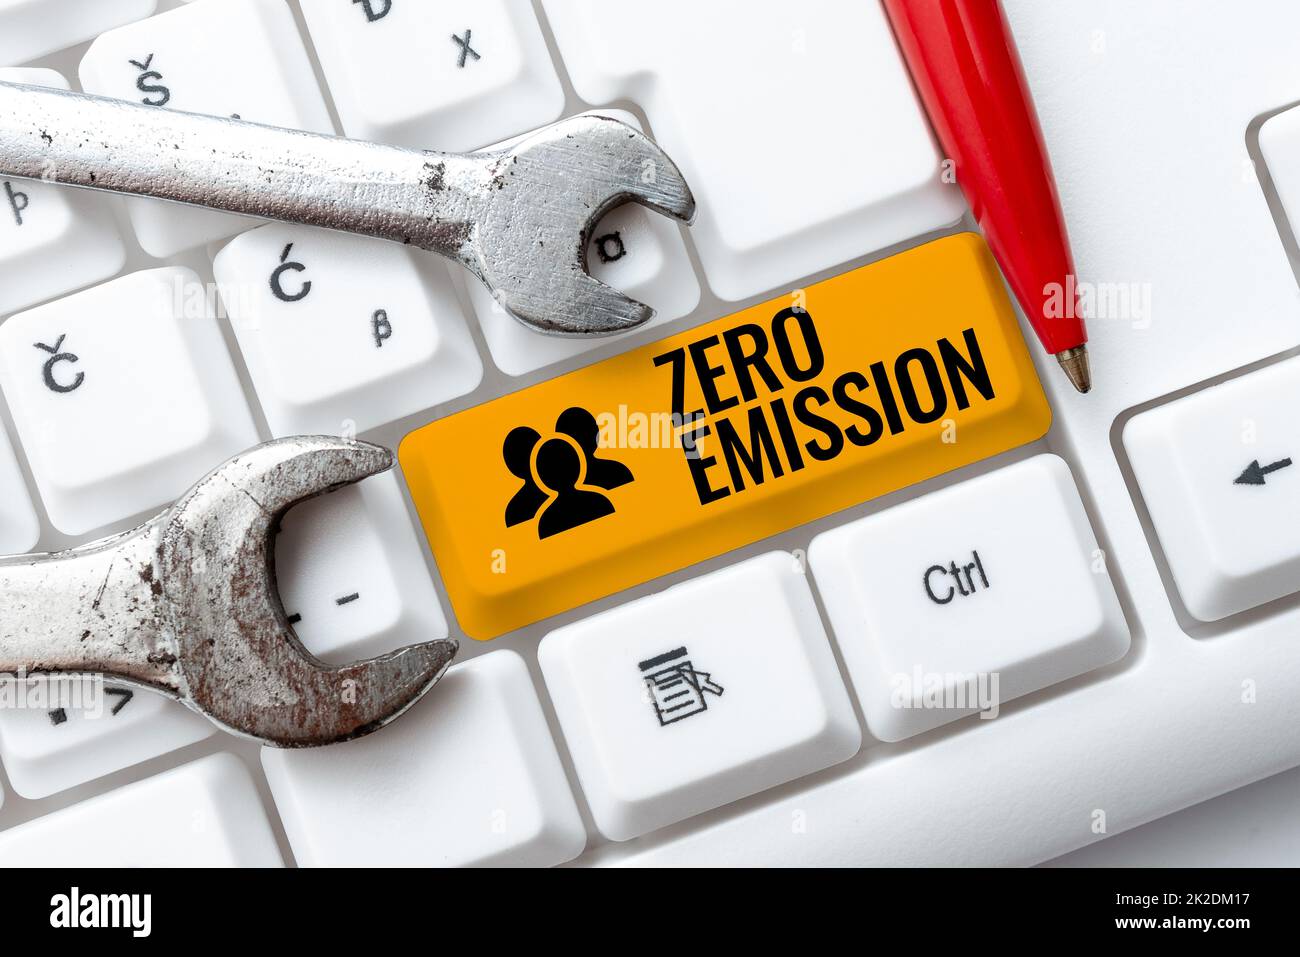 Sign displaying Zero Emission. Concept meaning Zero Emission Writing Interesting Online Topics, Typing Office Annoucement Messages Stock Photo